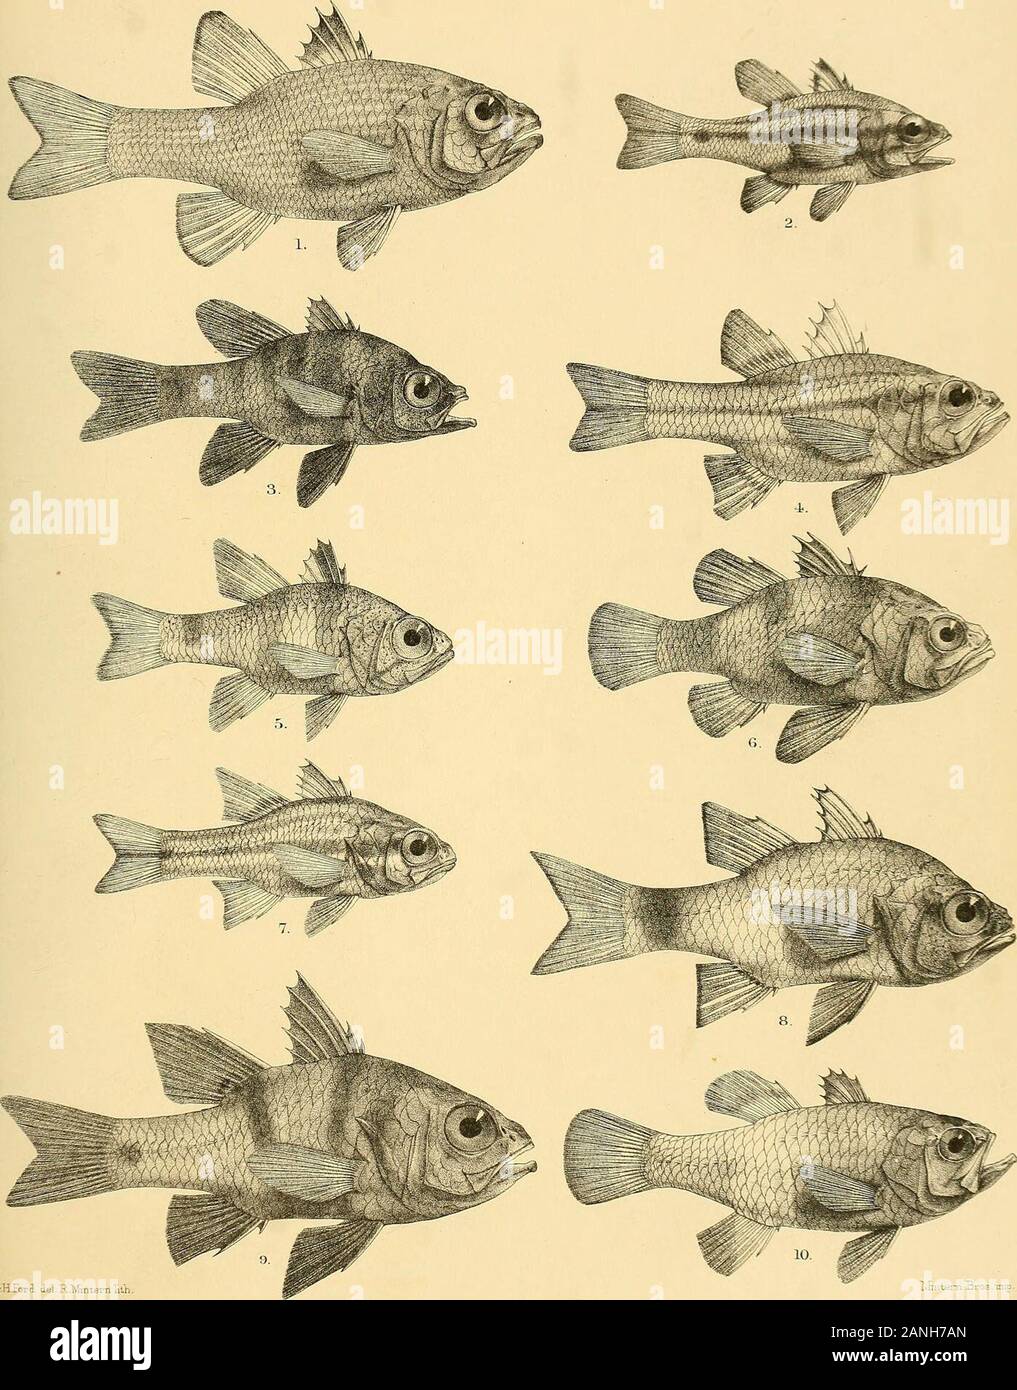 The fishes of India; being a natural history of the fishes known to inhabit the seas and fresh waters of India, Burma, and Ceylon . G.HFord del JRKmgHth Mmtera Bros. imp 1, AMBASSIS BACULIS. 2, A. THOMAS SI. 3,A. COMMERSONII. 4. A.N ALU A. fa, A.INTERRUPTA.6, A.GYMNOCEPHALUS. 7, A. DAYI. 8, A. UROT^ENIA. i Days Fishes of India.. GiHFoni del R.Mmtem nth ]..-.. - .?:-:-. 3ros imp- l.APOGON MULTTOENIATUS. 2.AKALAS0MA. 3. A.NIGRICANS. 4. A. FRENATUS. 5. A. SAVAYENSIS.C. A.NIGR1P1NNIS. 7. A. ENDEKATvENIA. 8.A. AUxtEUS. 9. A. BIFASCIATUS. 10. A. GLAGA. Days Fishes of India. Plate Stock Photo